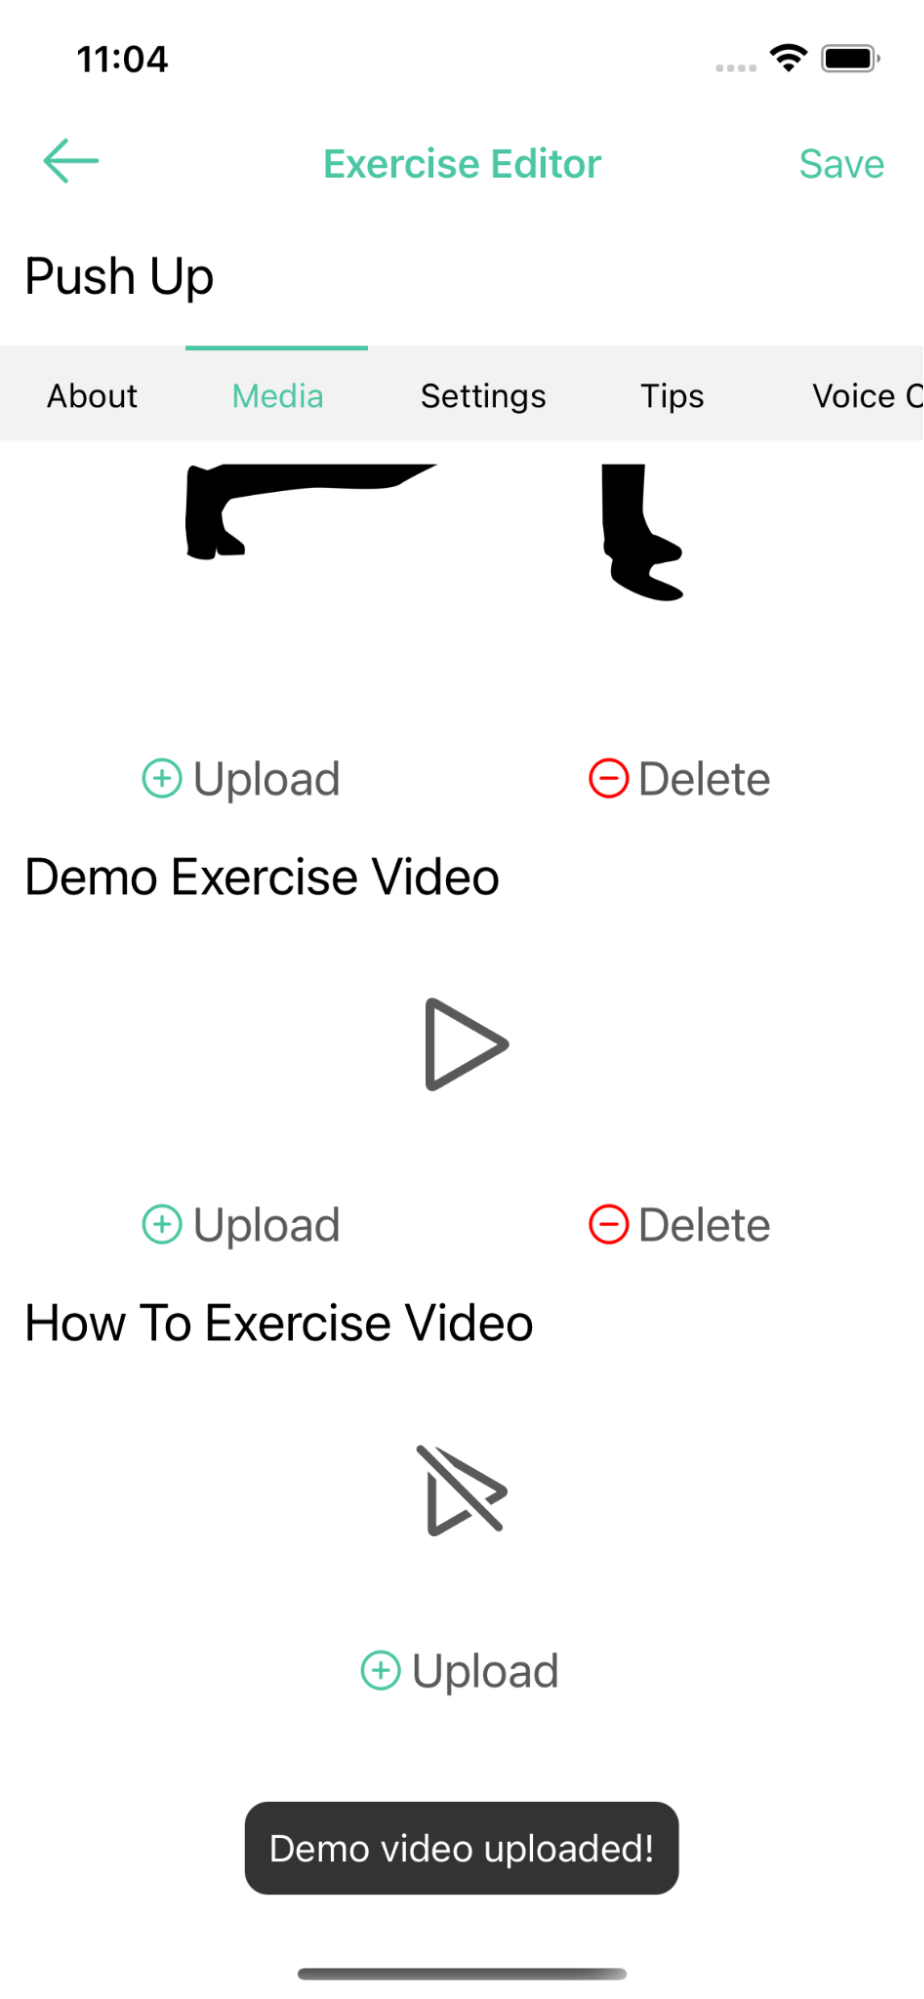 Your own demo and how-to videos for the custom exercise!